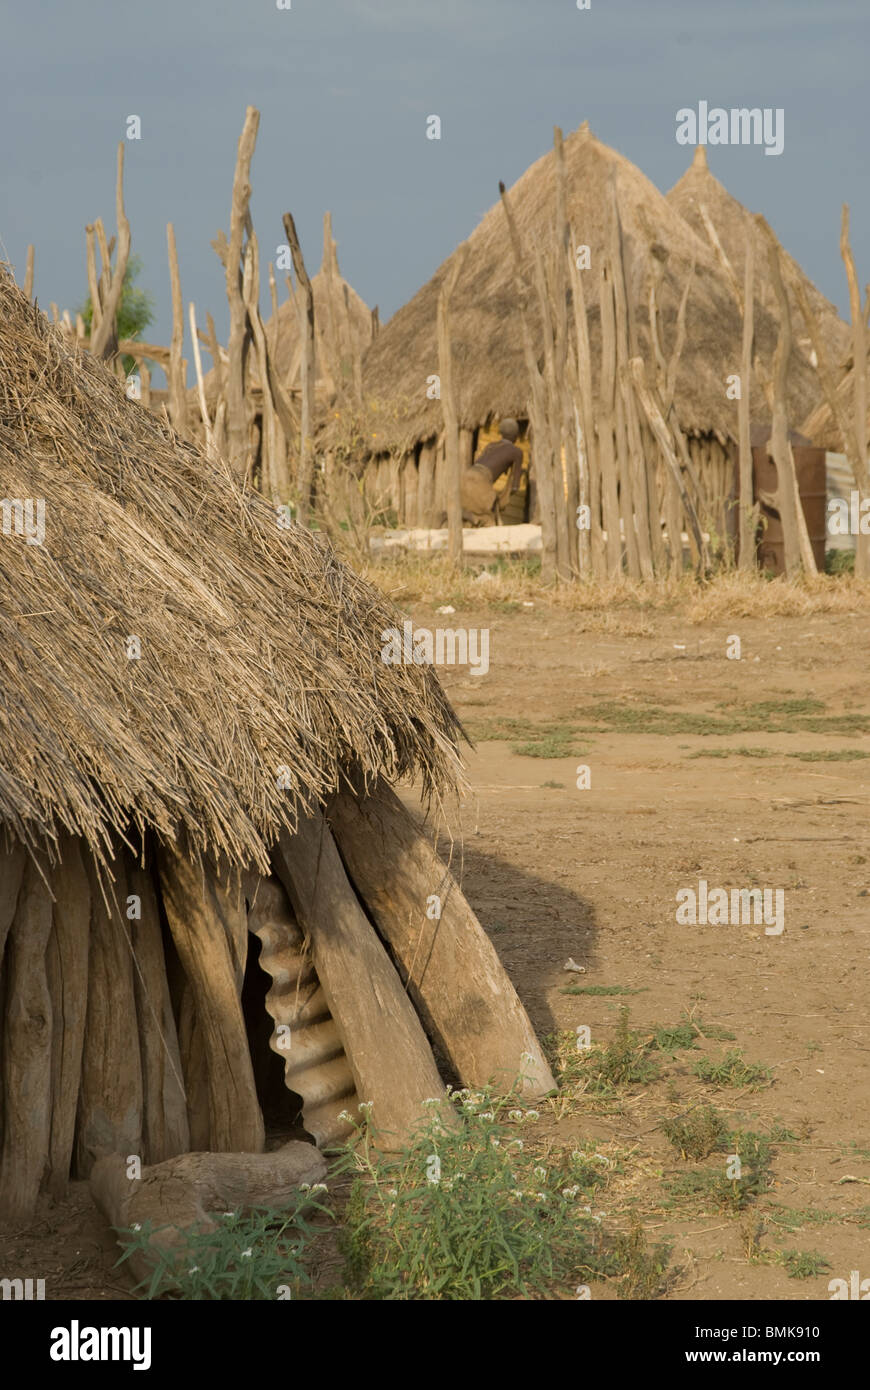 Ethiopia: Lower Omo River Basin, Karo village of Duss, typical thatched homes Stock Photo